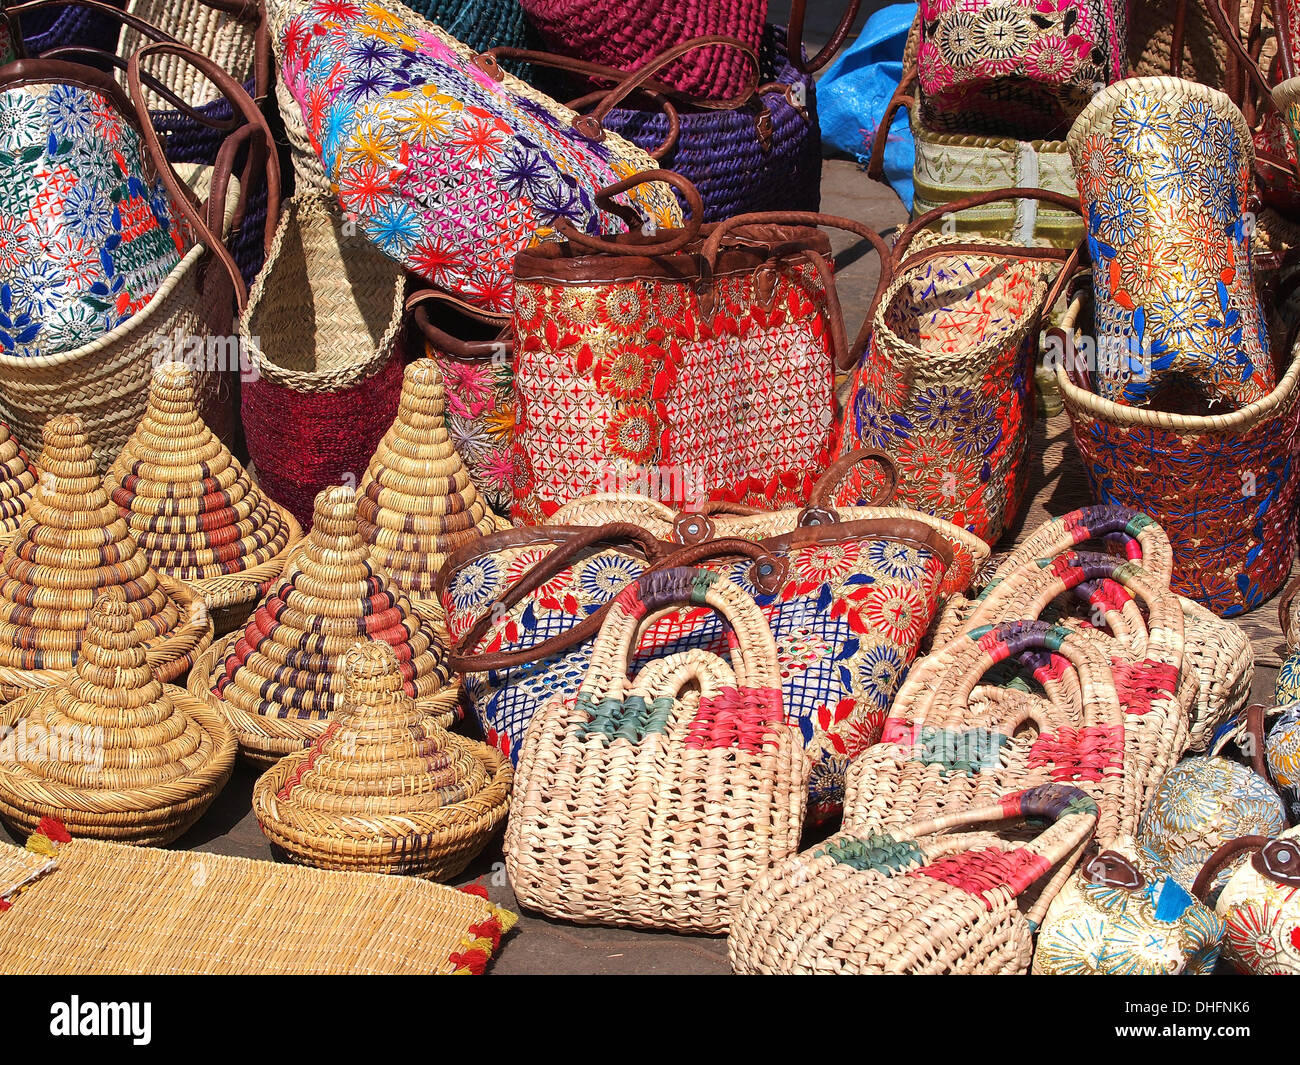 Hand Made Bags And Baskets On The Open Market In Marrakech Marocco Stock Photo Alamy